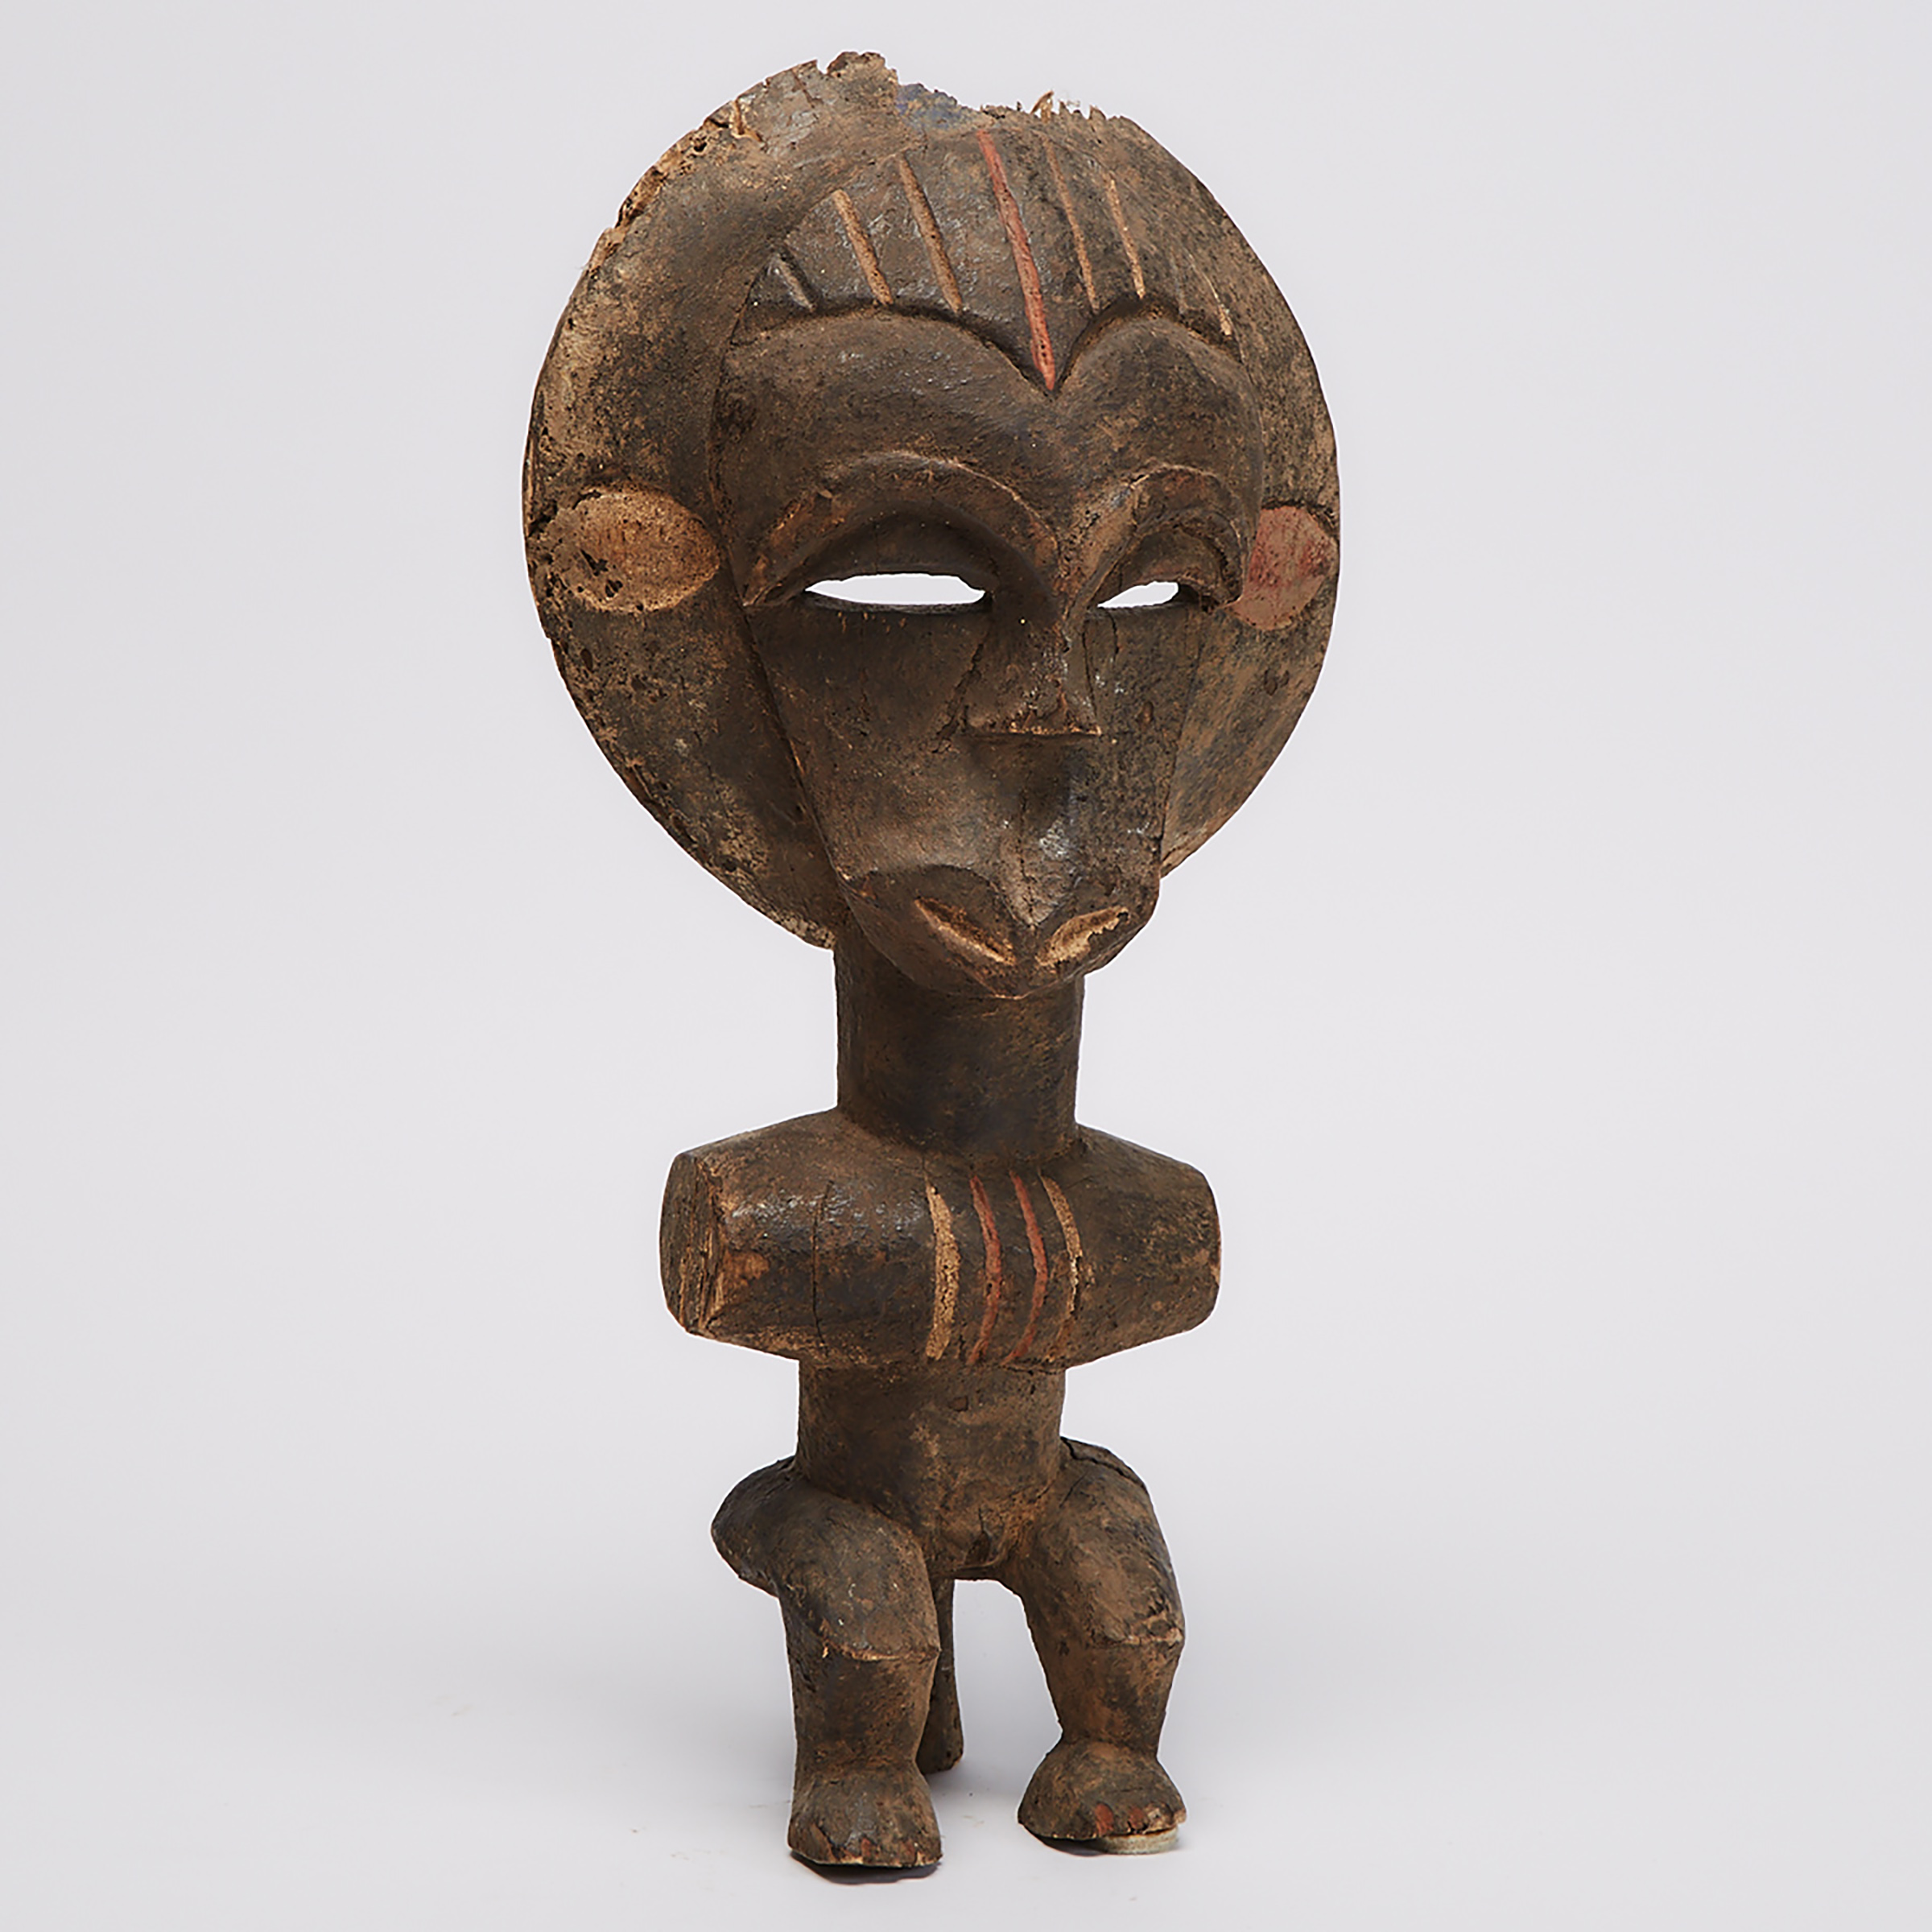 Reliquary Figure, possibly Gabon, Central Africa